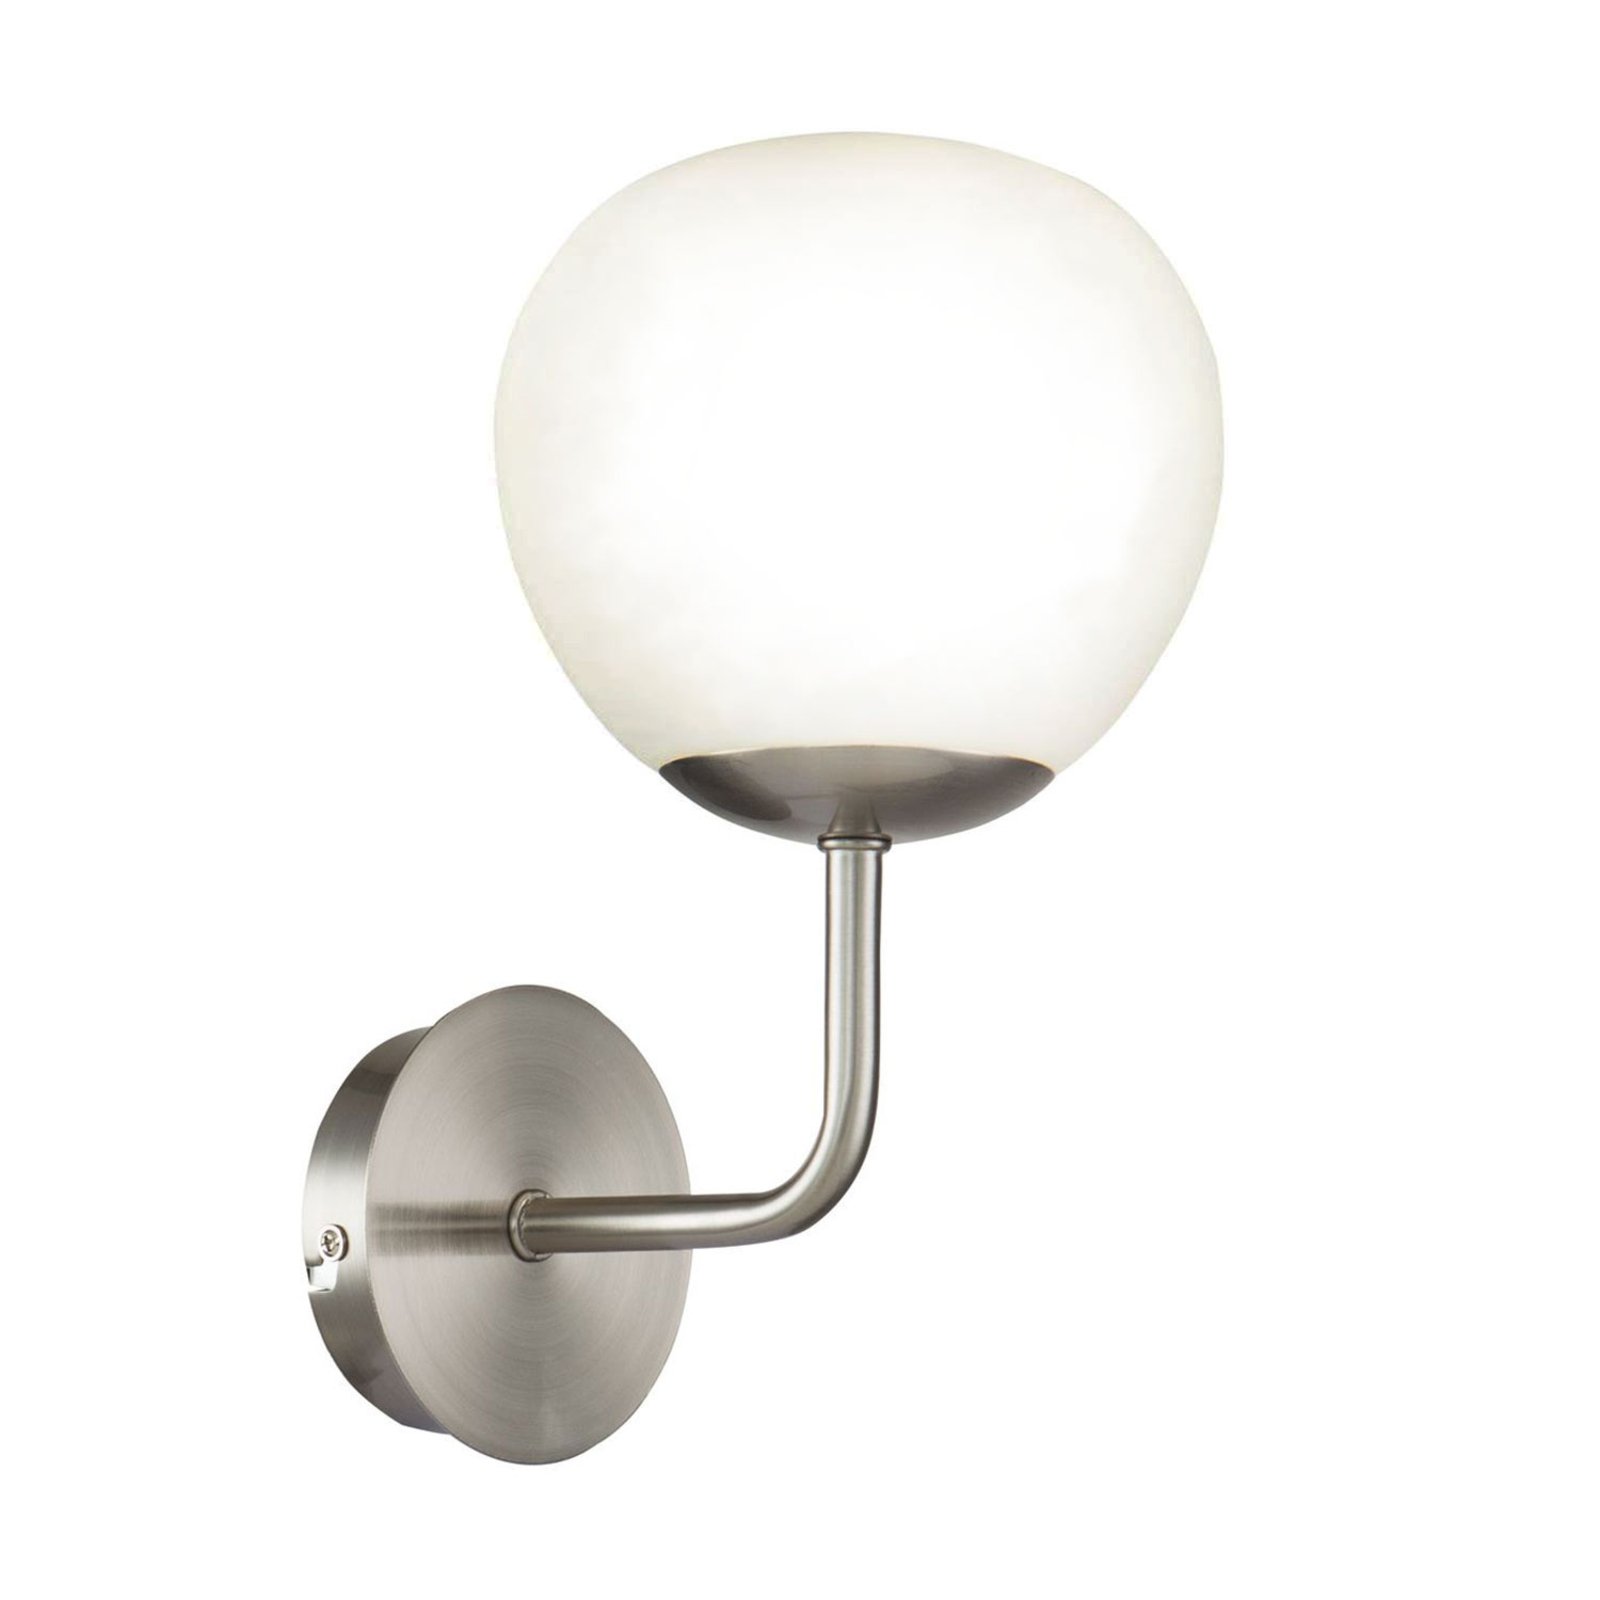 Erich wall light in nickel, glass lampshade